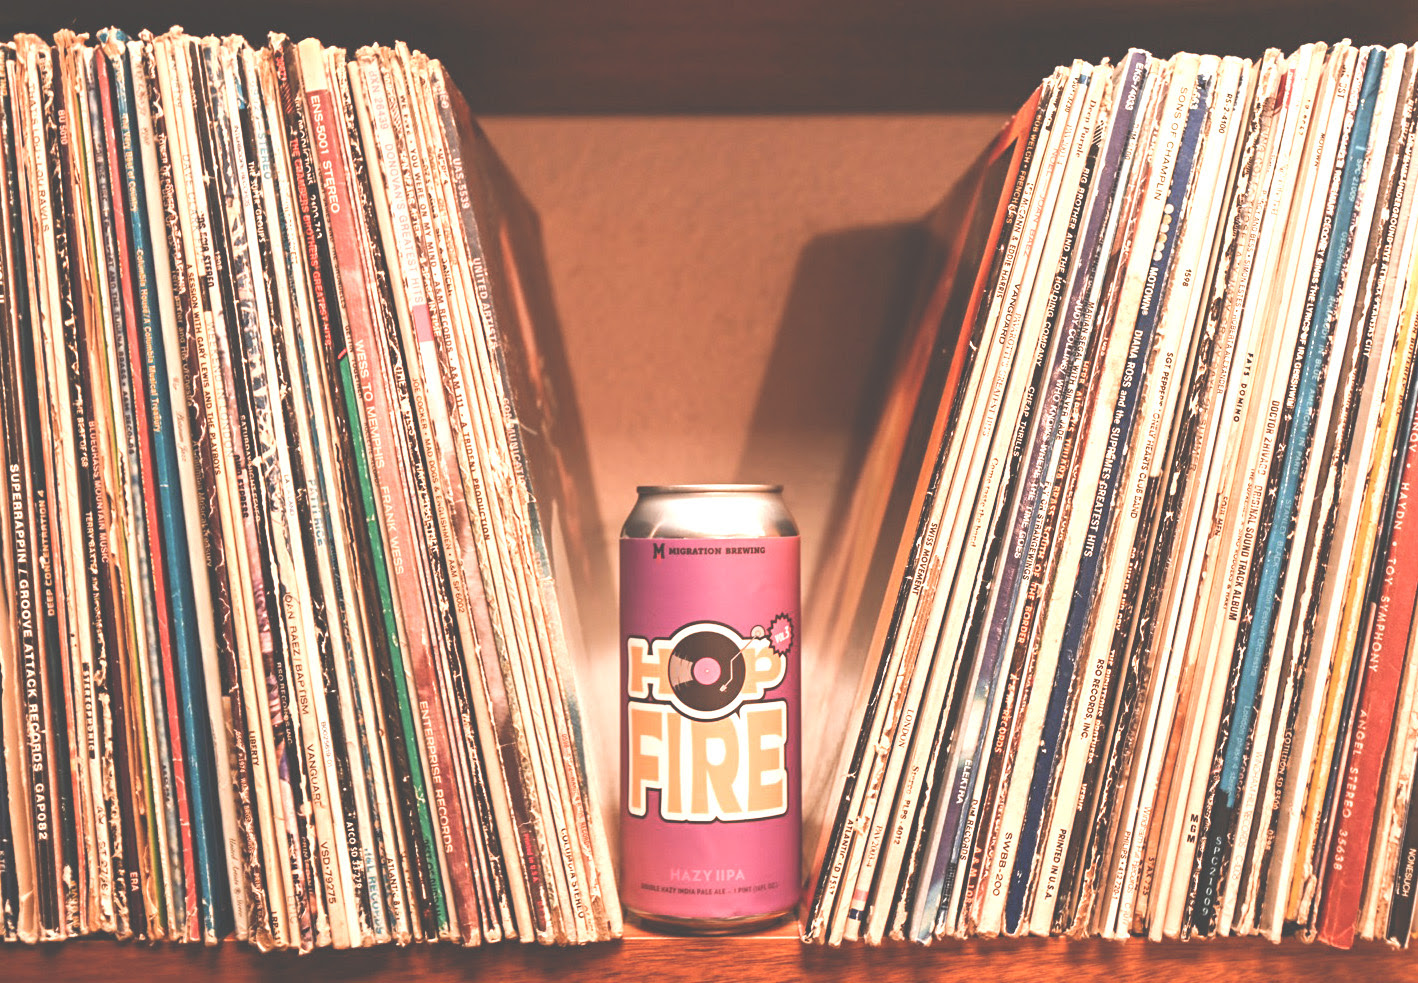 image of Hop Fire Vol. 3 courtesy of Migration Brewing